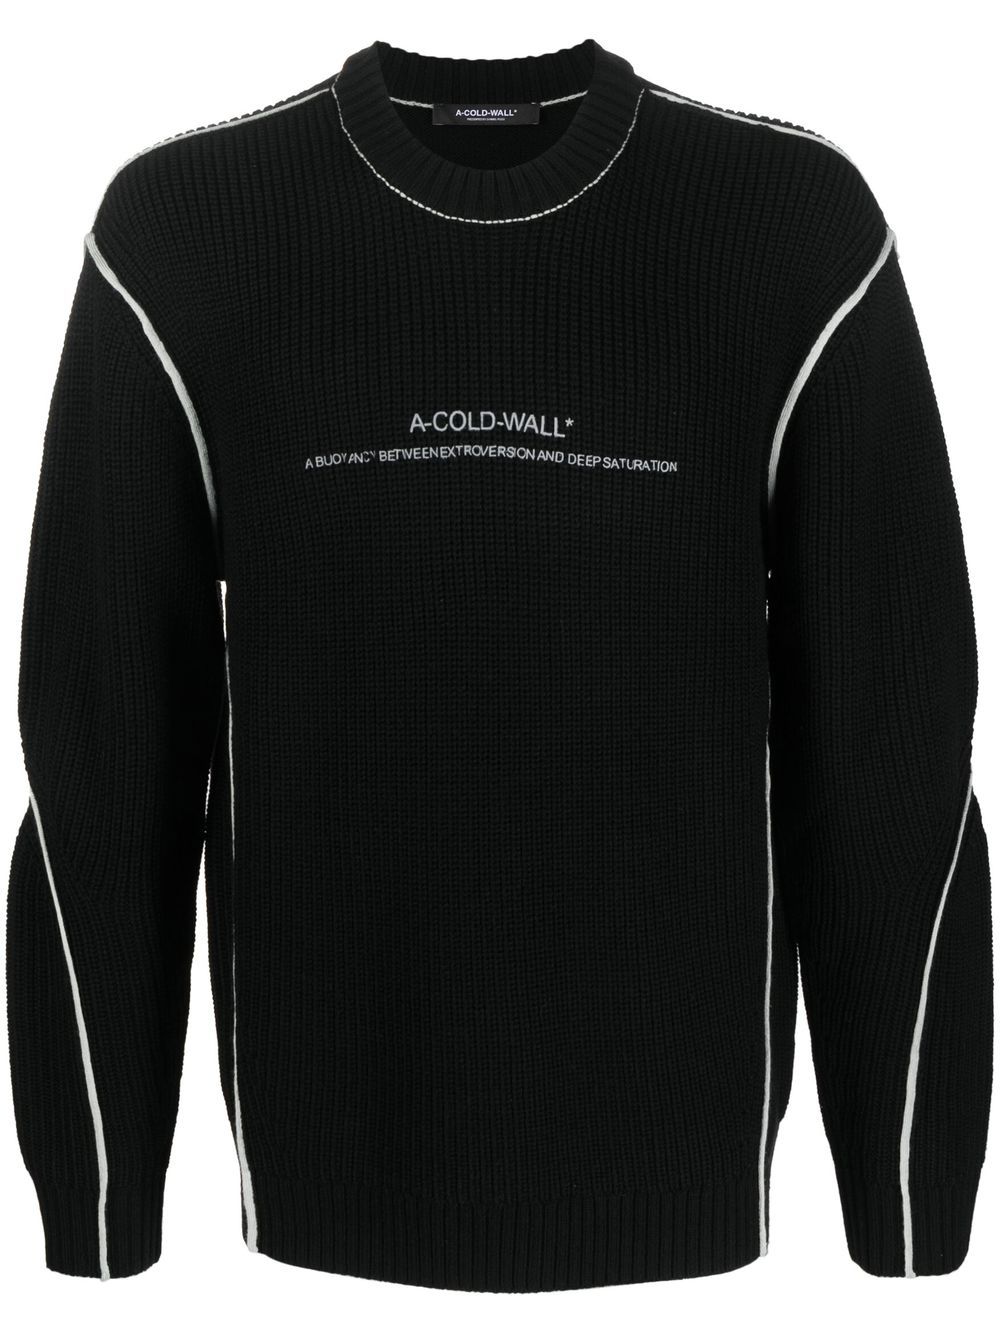 A-COLD-WALL* Dialouge logo-embroidered jumper - Black von A-COLD-WALL*